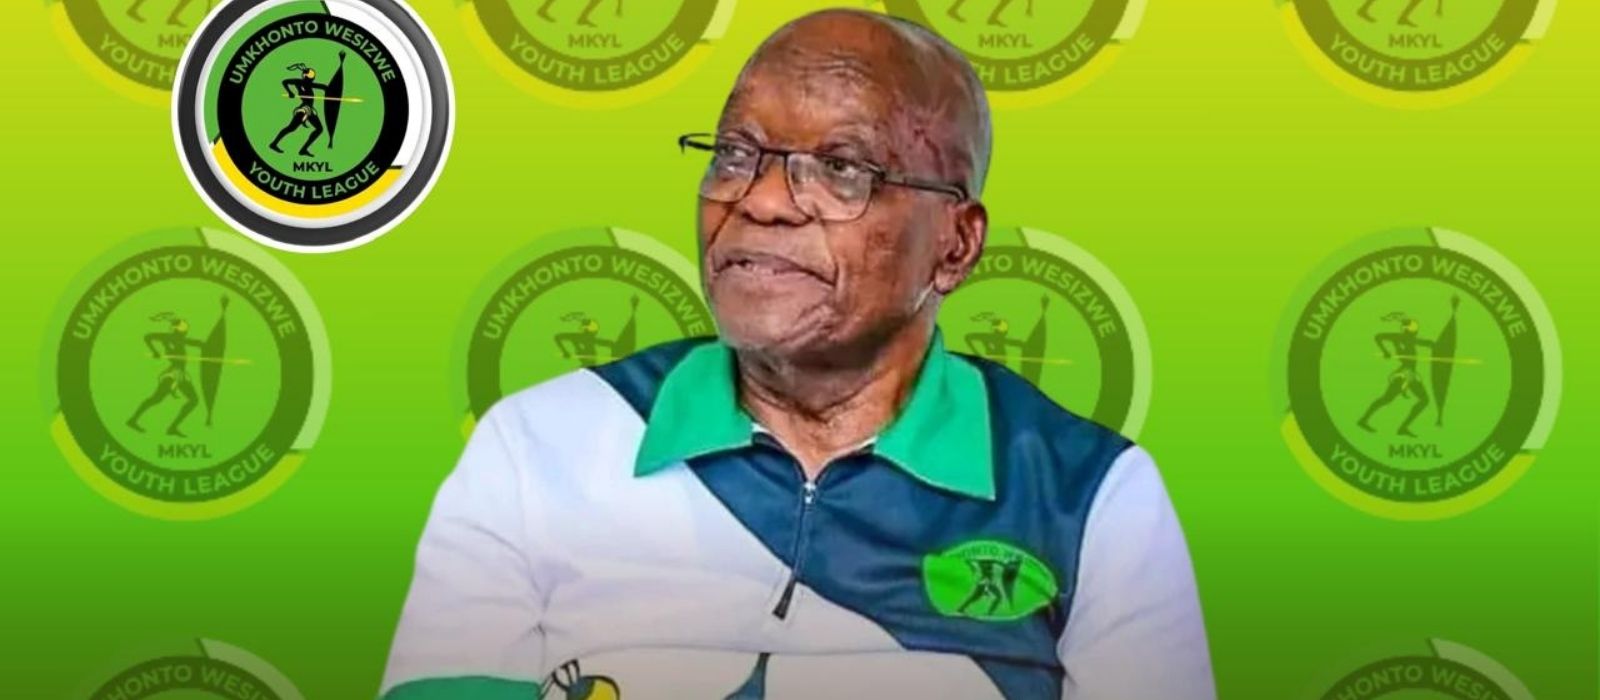 Another win and loss for Jacob Zuma’s MK party  camp